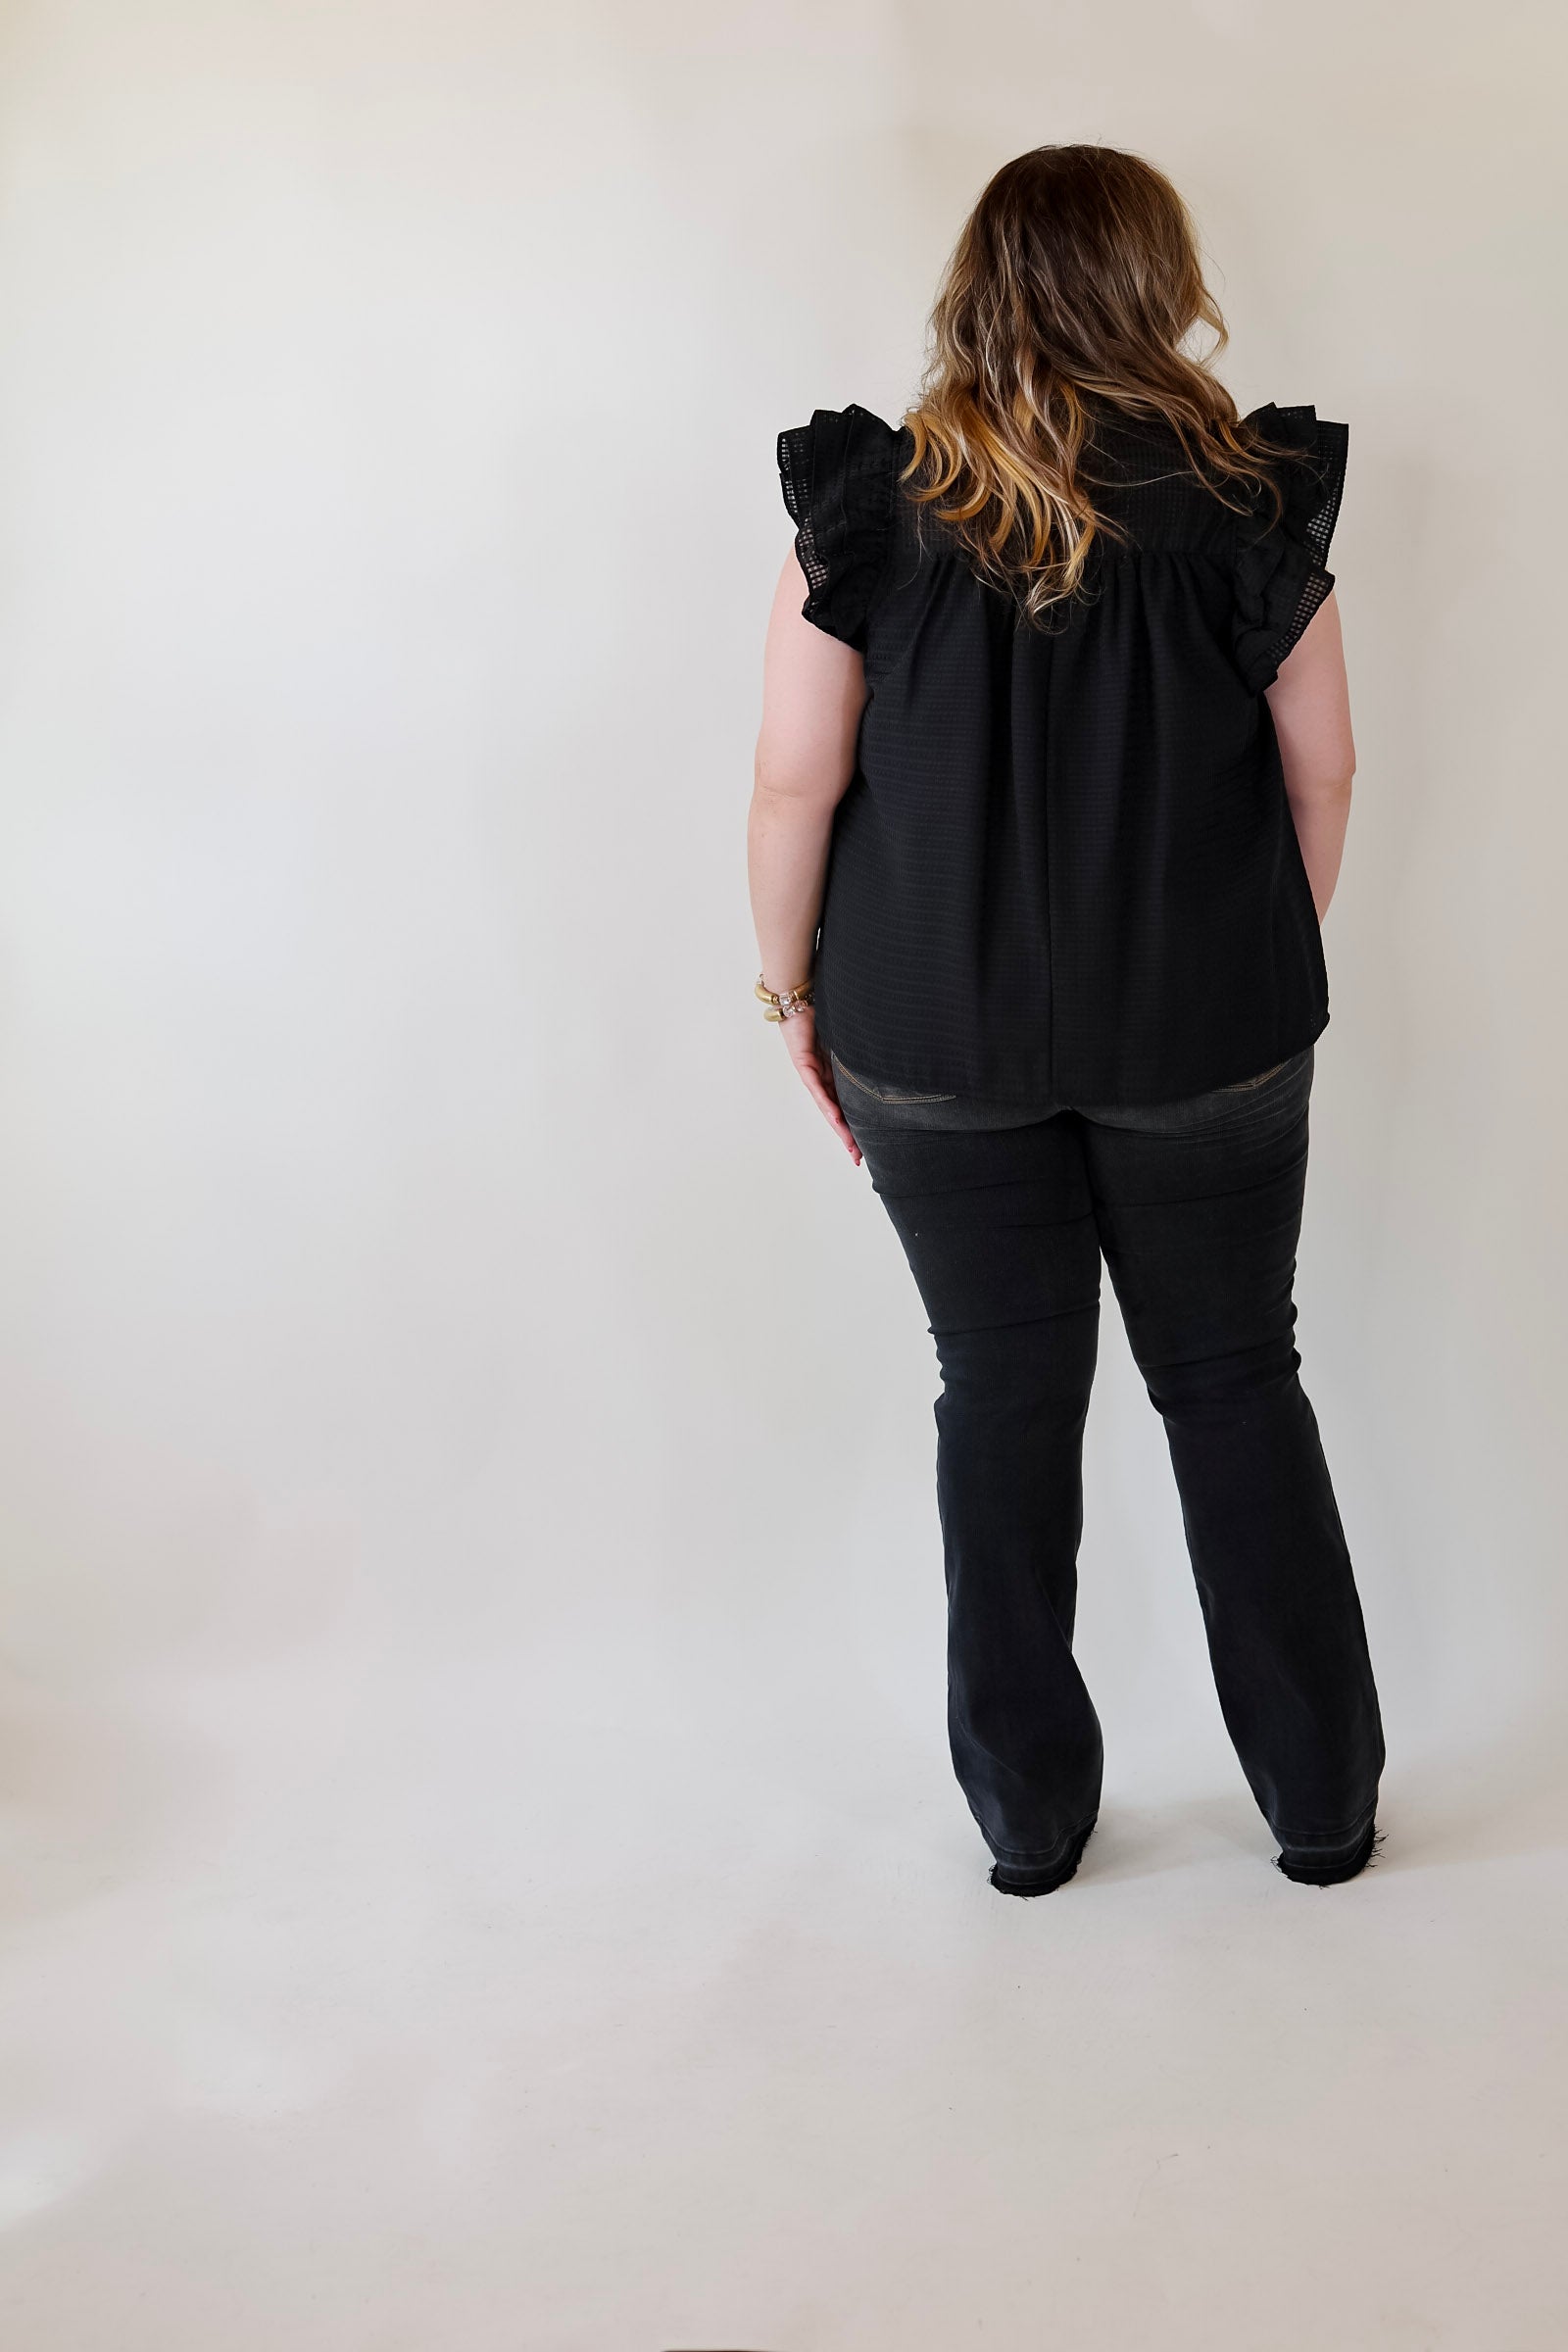 Perfectly Fabulous Ruffle Cap Sleeve Top in Black - Giddy Up Glamour Boutique